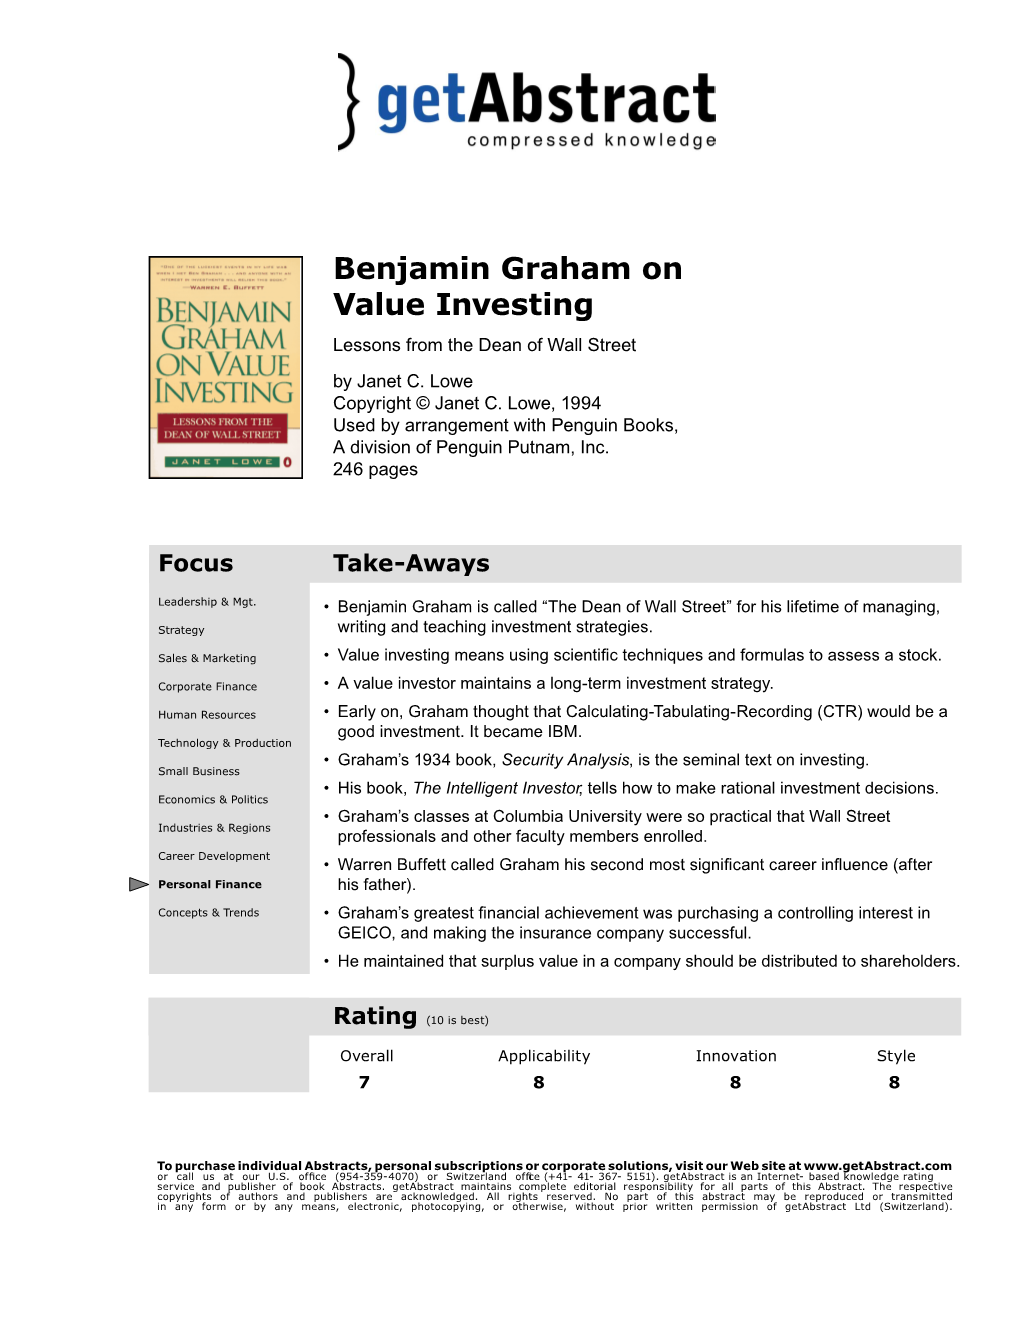 Benjamin Graham on Value Investing Lessons from the Dean of Wall Street by Janet C